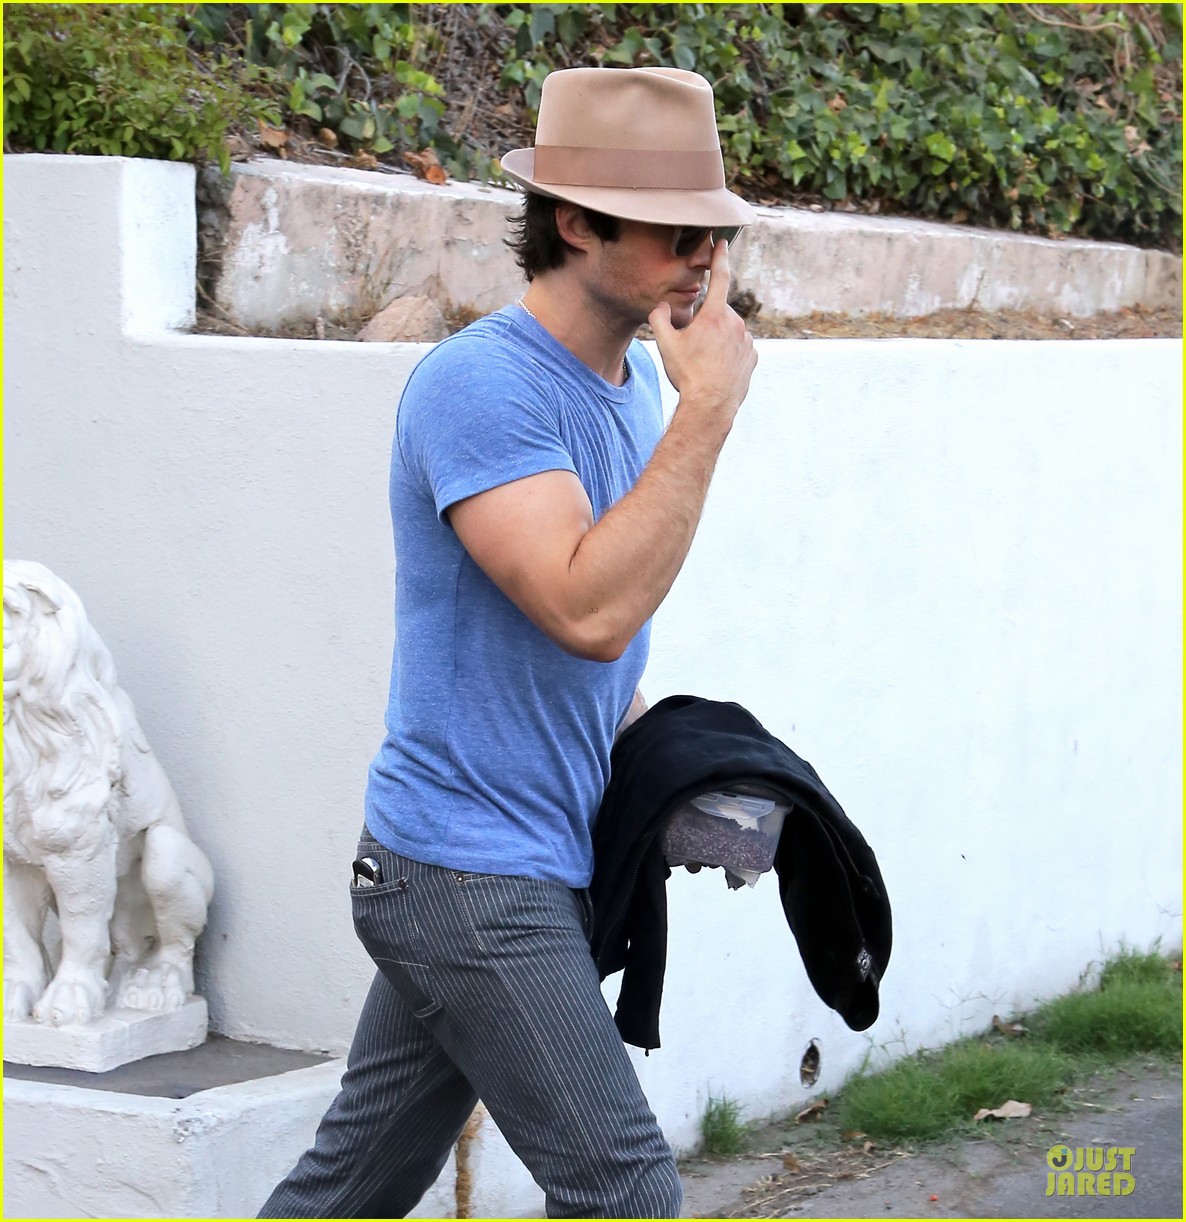 Ian Somerhalder & Nikki Reed Get Cleaned Up at Her House After Sweaty W...